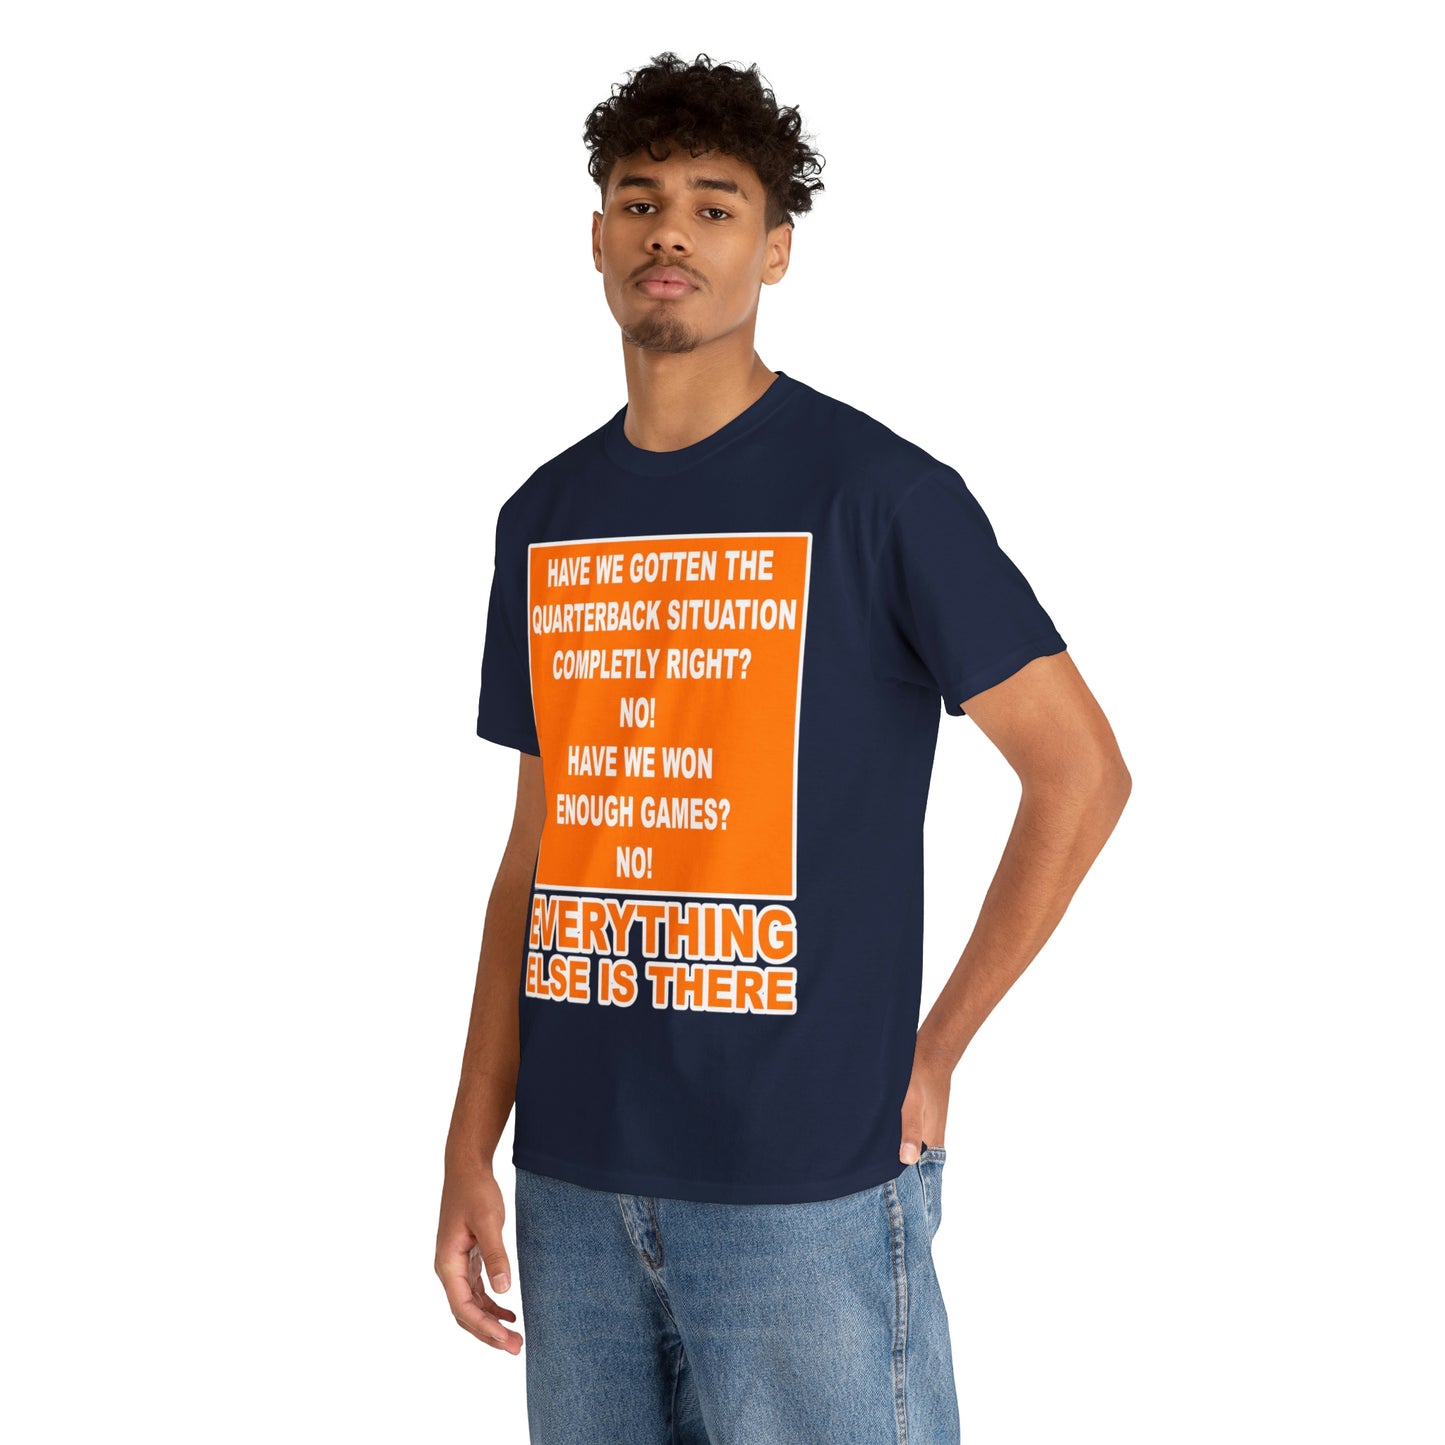 George McCaskey Quote Shirt Up to 5X